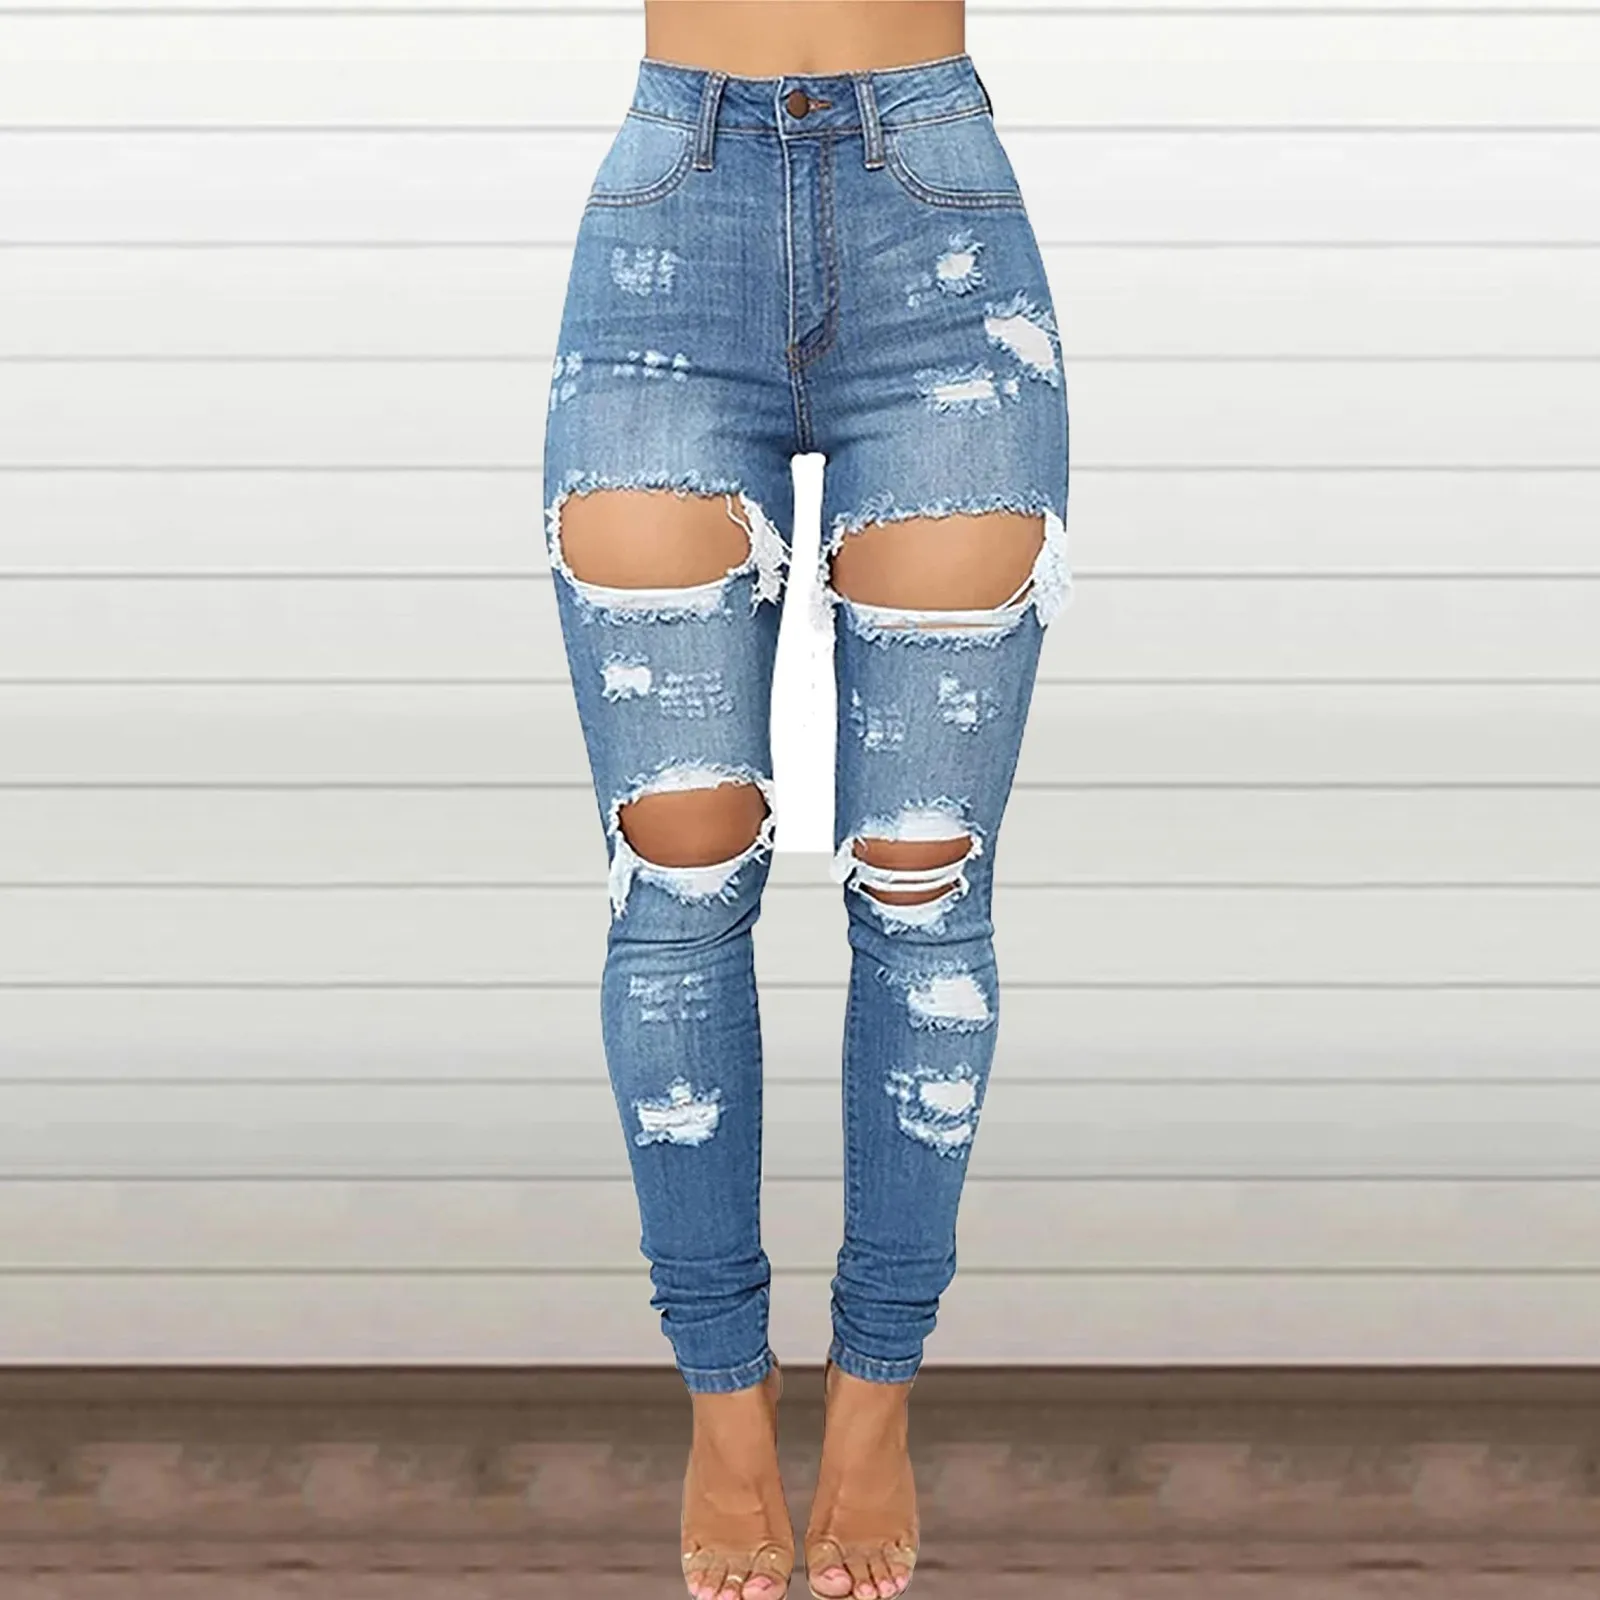 

Holes Ripped Jeans For Women Women's High Waisted Denim Trousers Butt Lift Skinny Distressed Stretch Jeans Womens Denim Pants